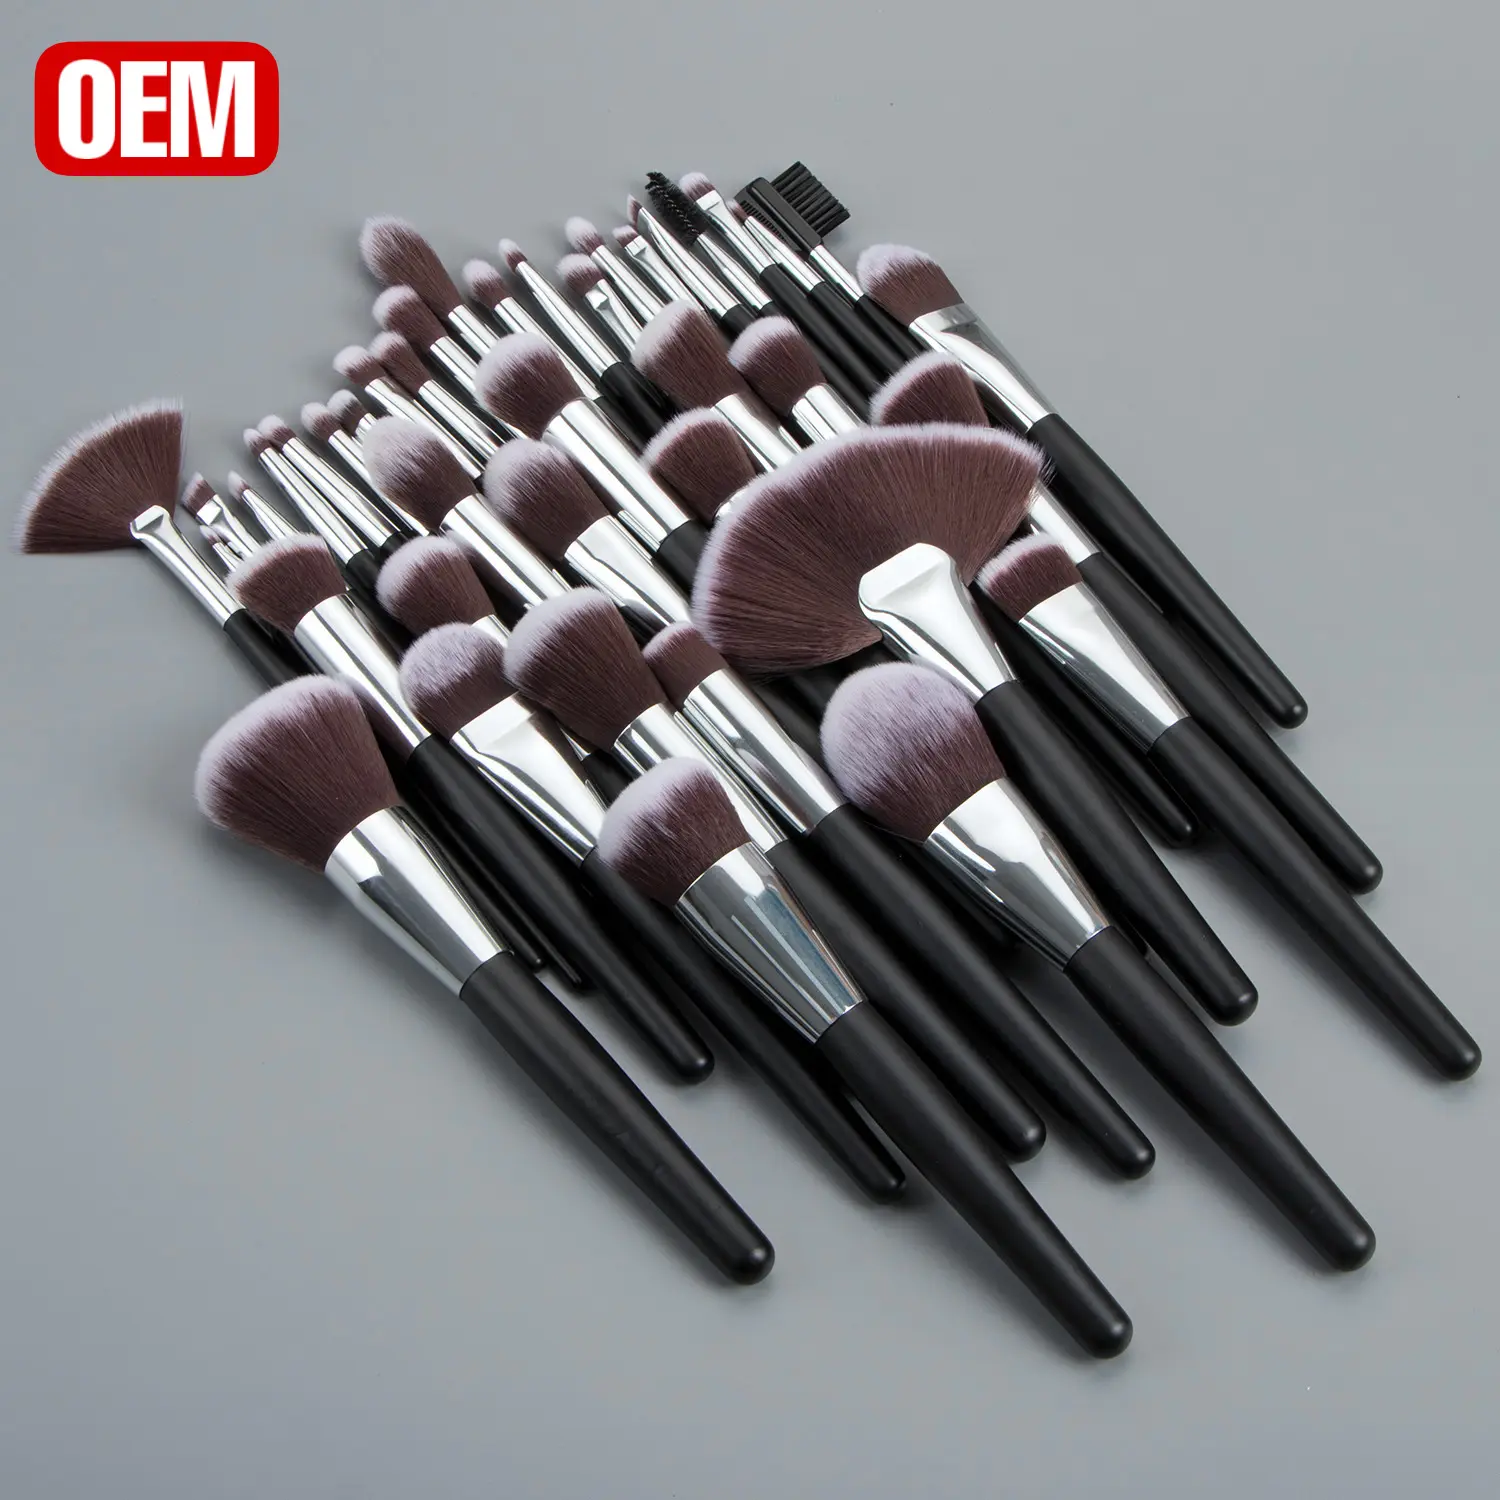 Best Selling Black White Everyday Use Make Up Face Eye Private Label 40 Piece Makeup Brushes Set